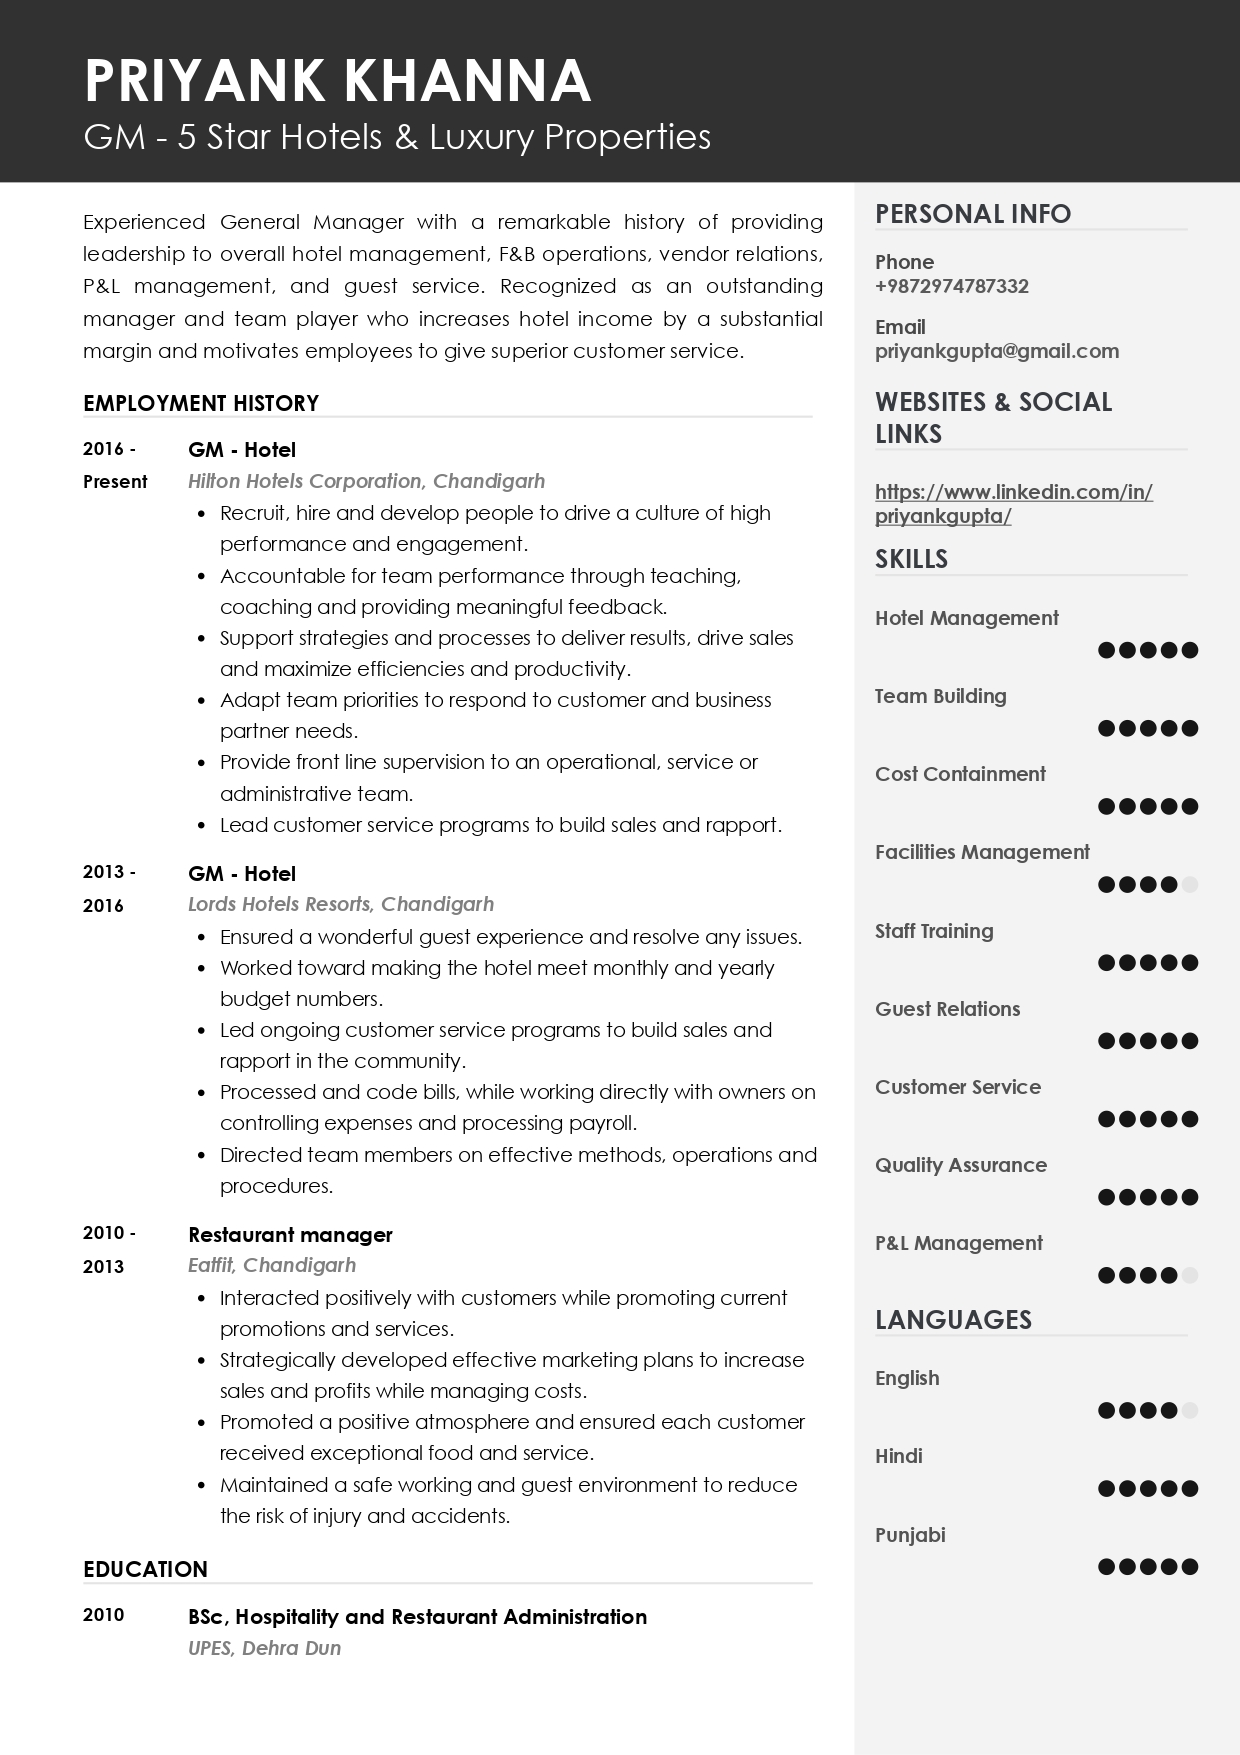 Sample Resume of GM-Hotel | Free Resume Templates & Samples on Resumod.co